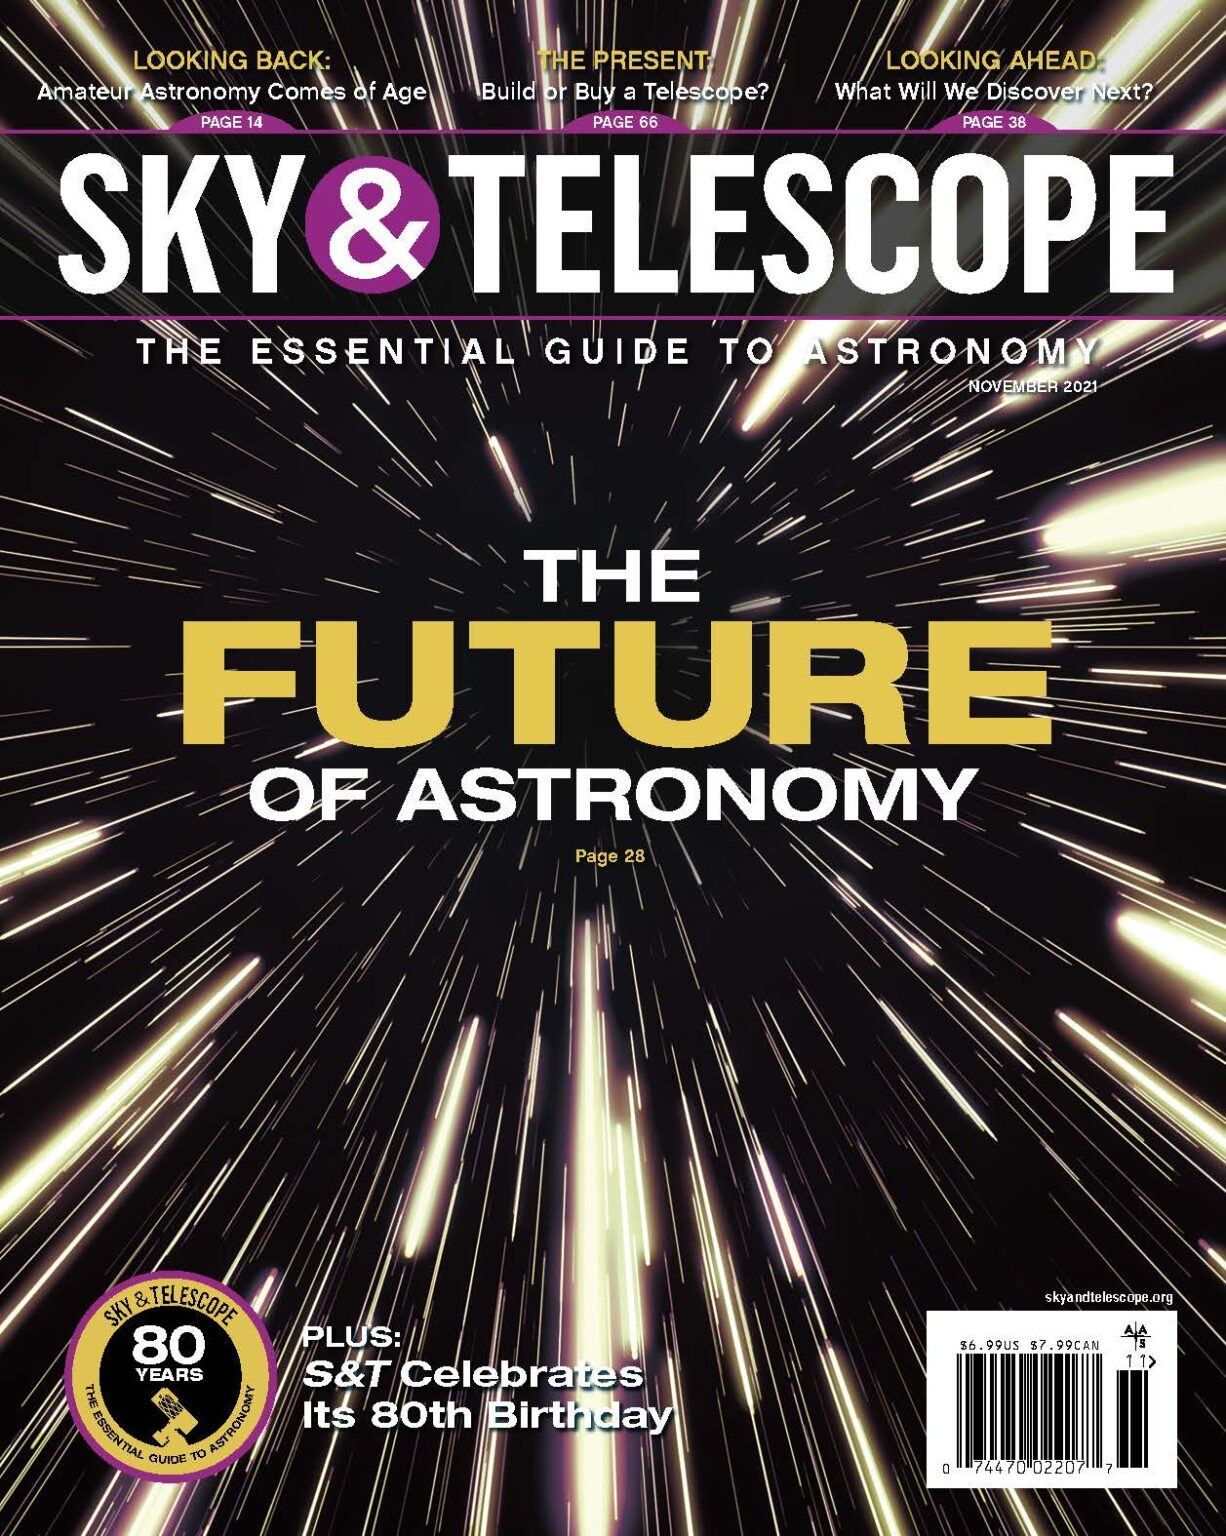 Nautilus Space Observatory Featured in Sky & Telescope